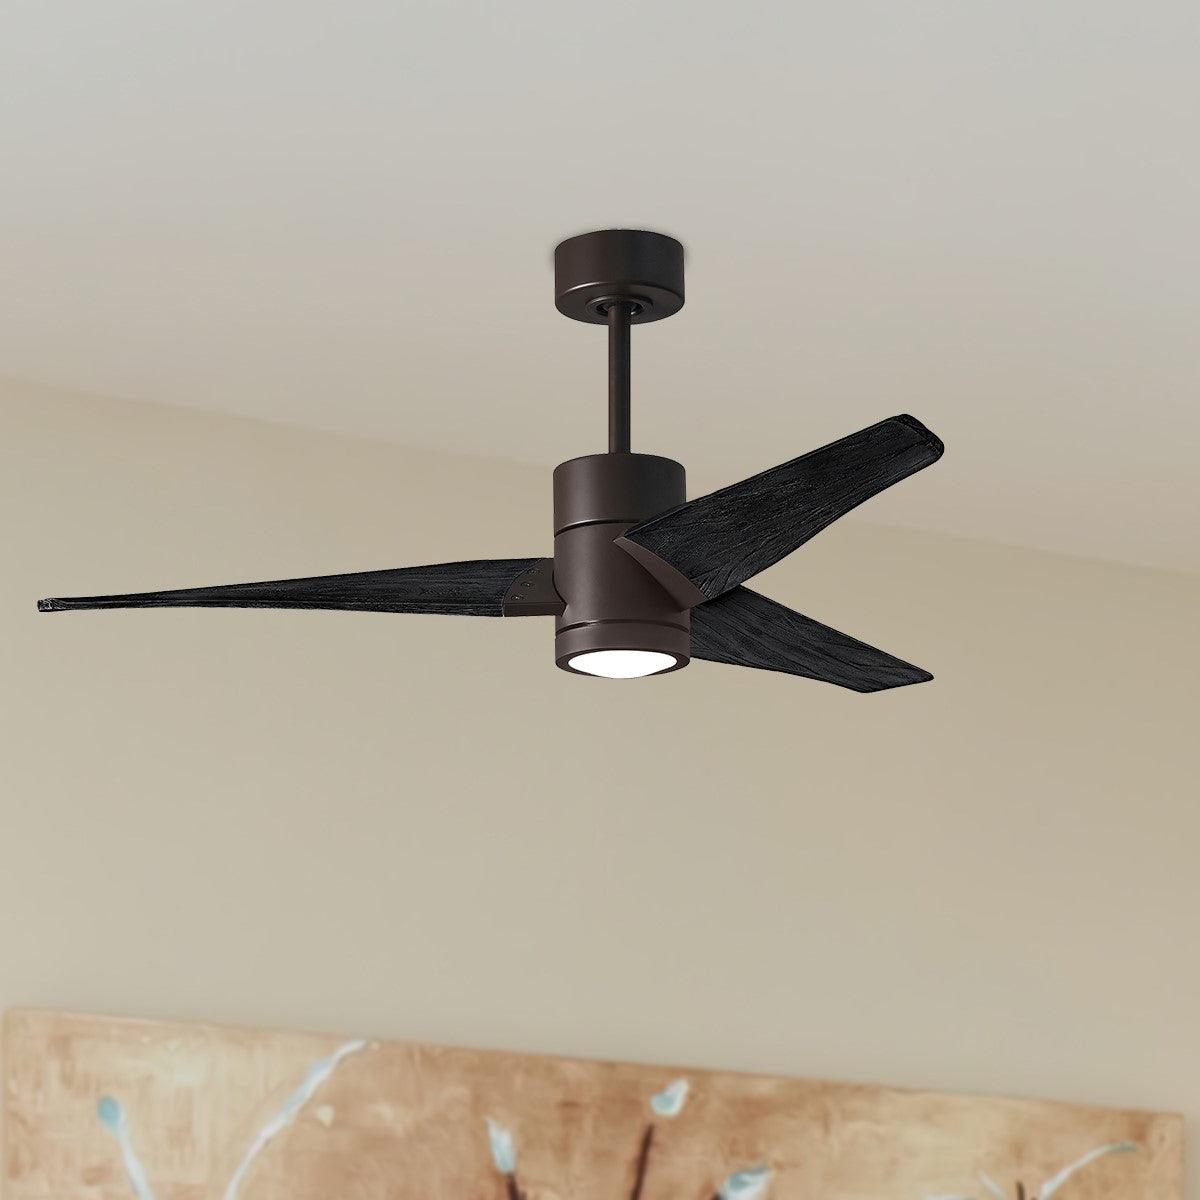 Super Janet 52 Inch Outdoor Ceiling Fan With Light, Wall And Remote Control Included